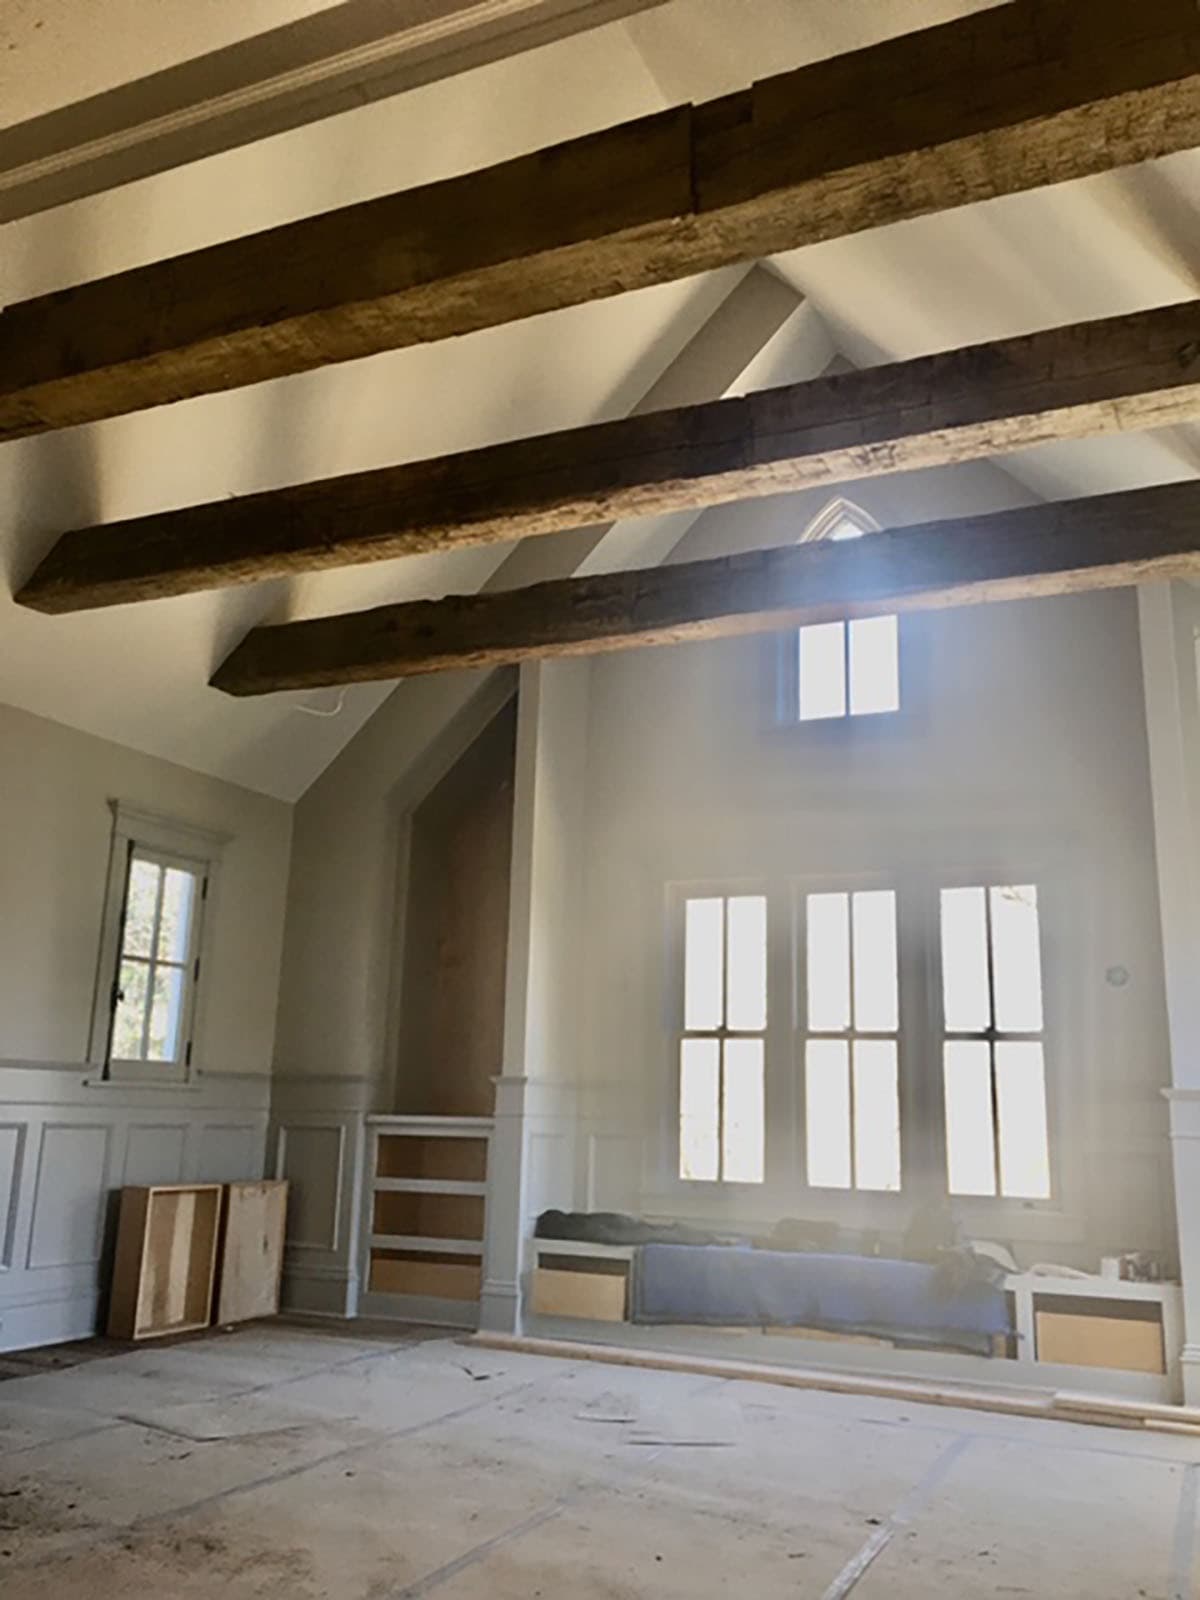 Beams in old places get new faces